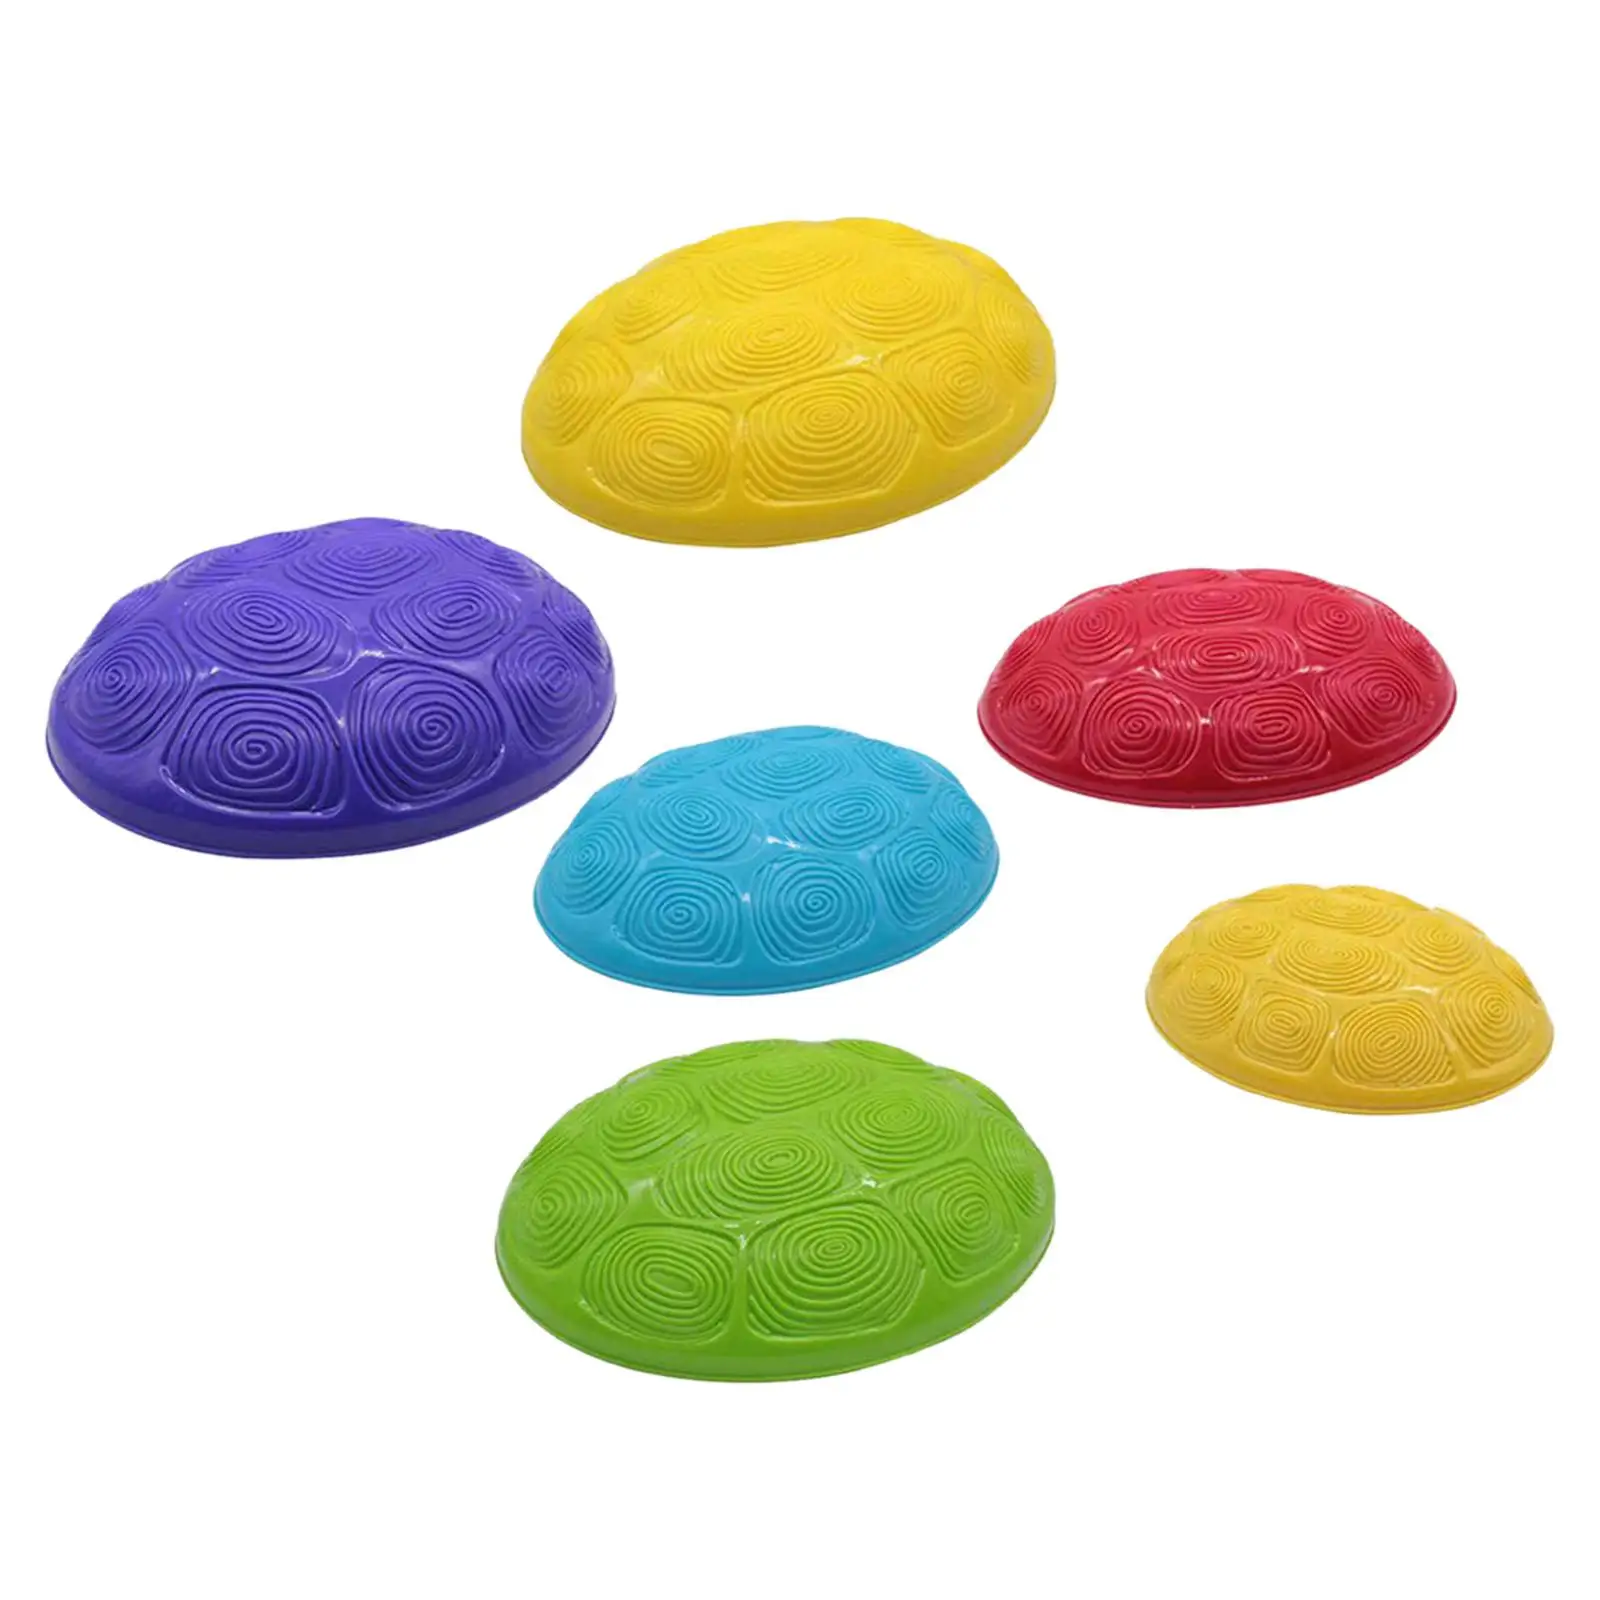 6 Pieces Balance Stepping crossing River stone for Outdoor Indoor